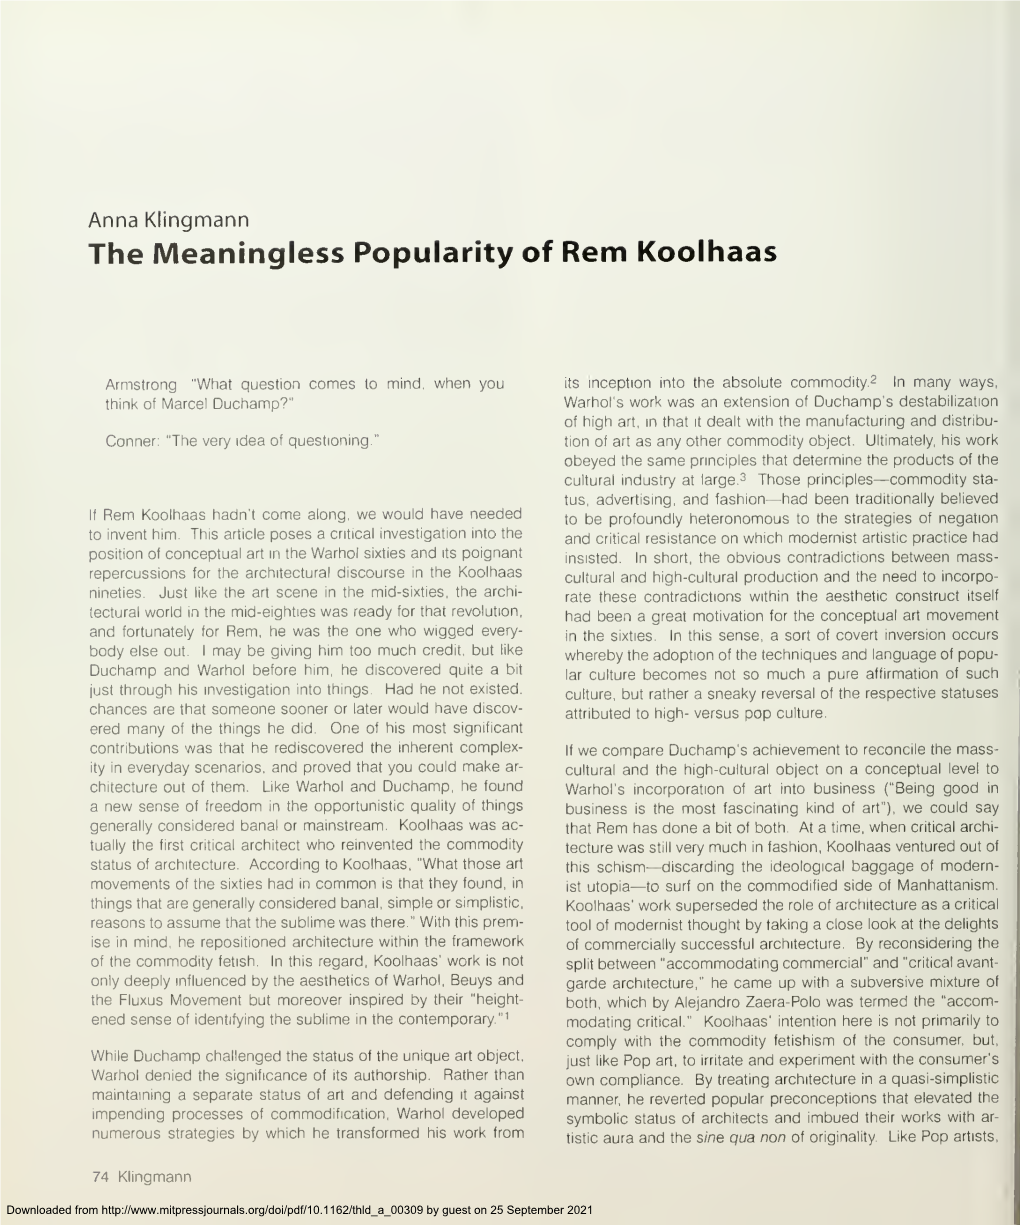 The Meaningless Popularity of Rem Koolhaas